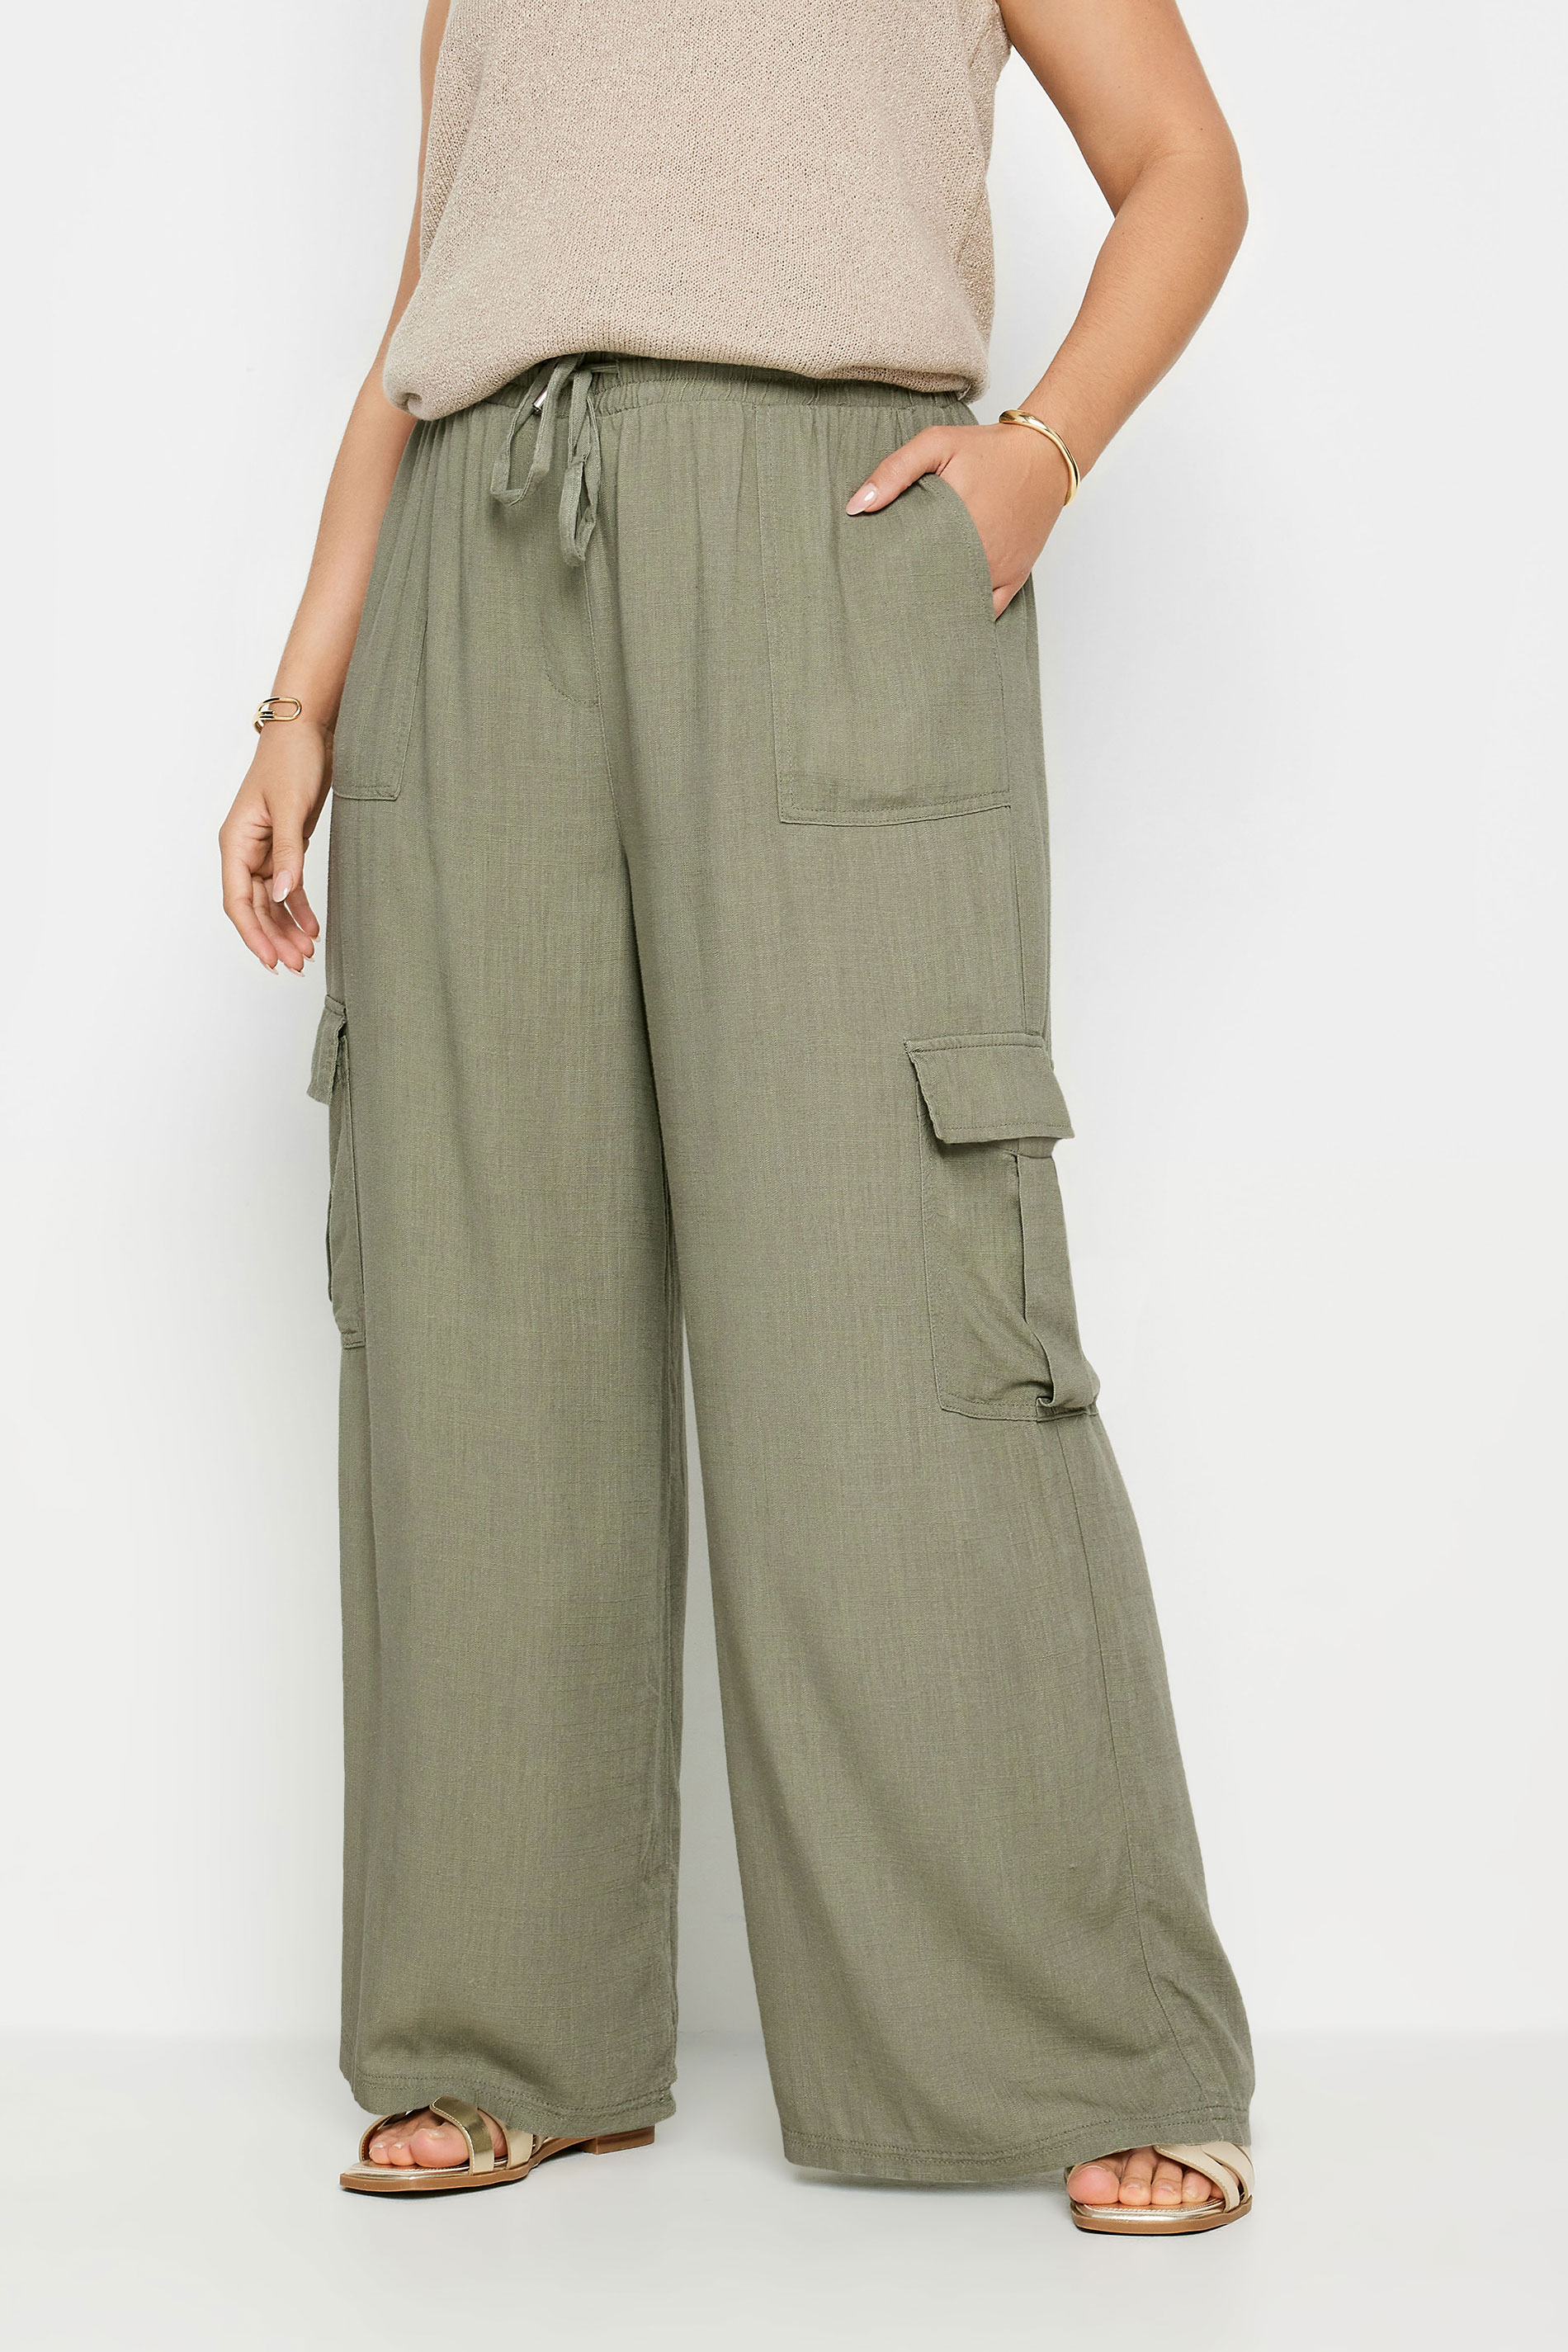 YOURS Plus Size Khaki Green Linen Wide Leg Cargo Trousers | Yours Clothing 2